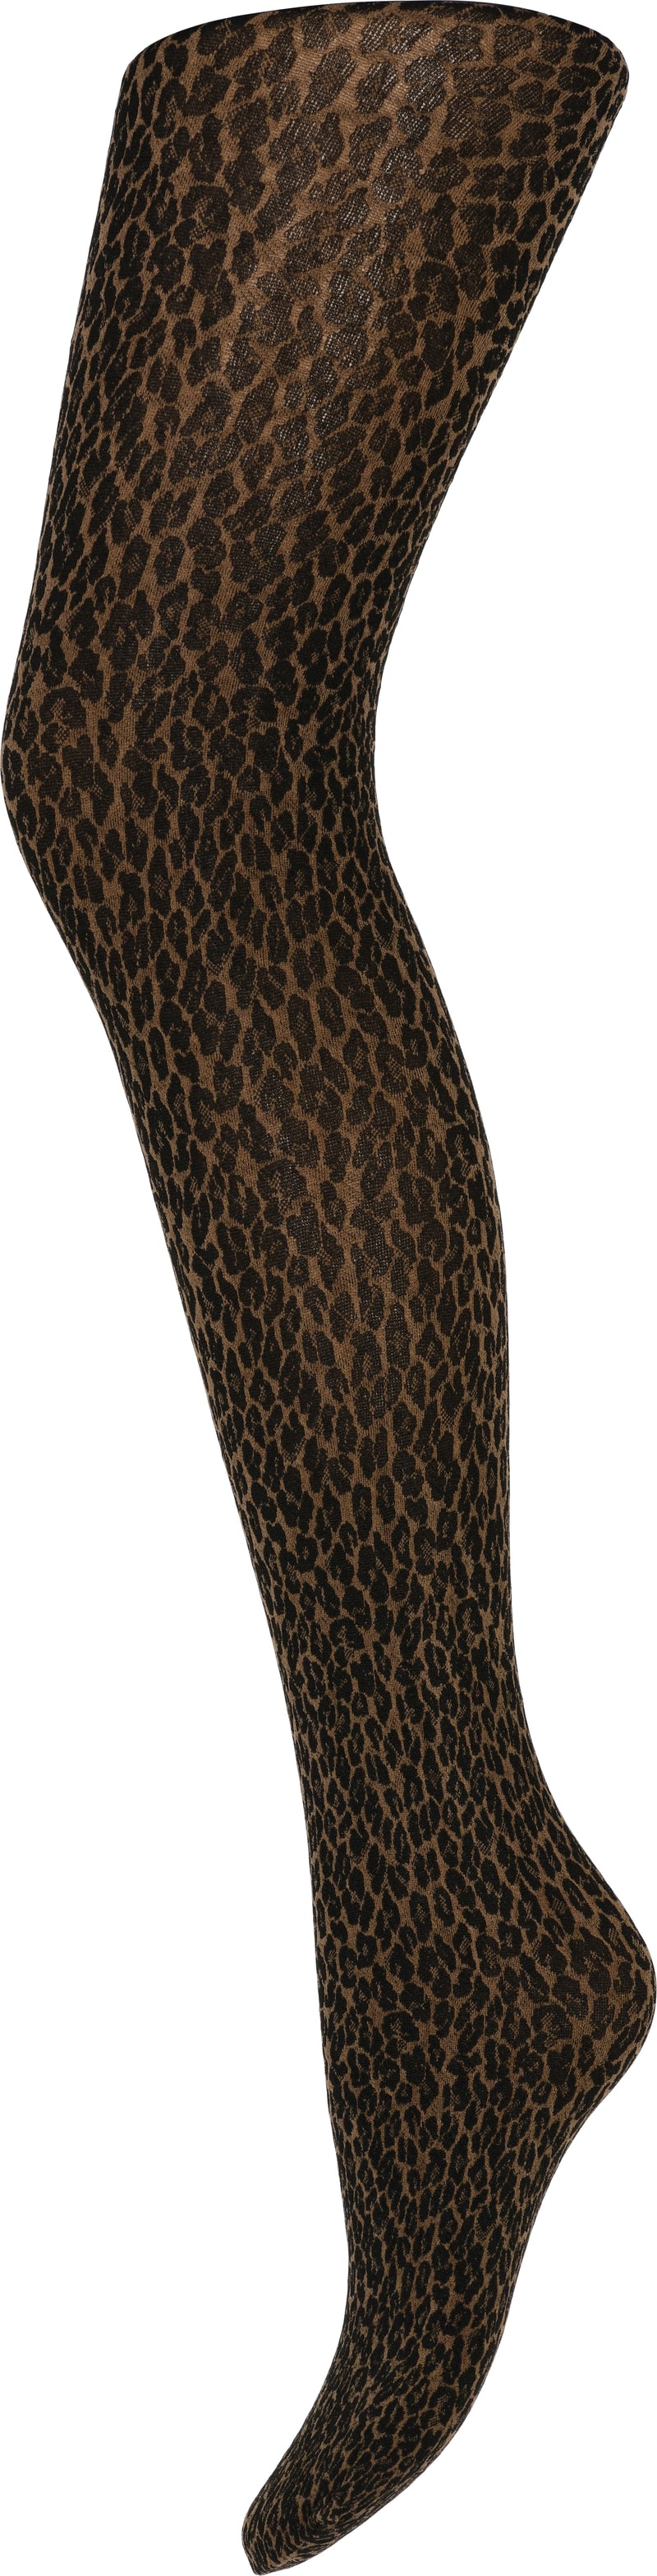 HYPE THE DETAIL tights leopard - Brown - 3-16003-0-4262